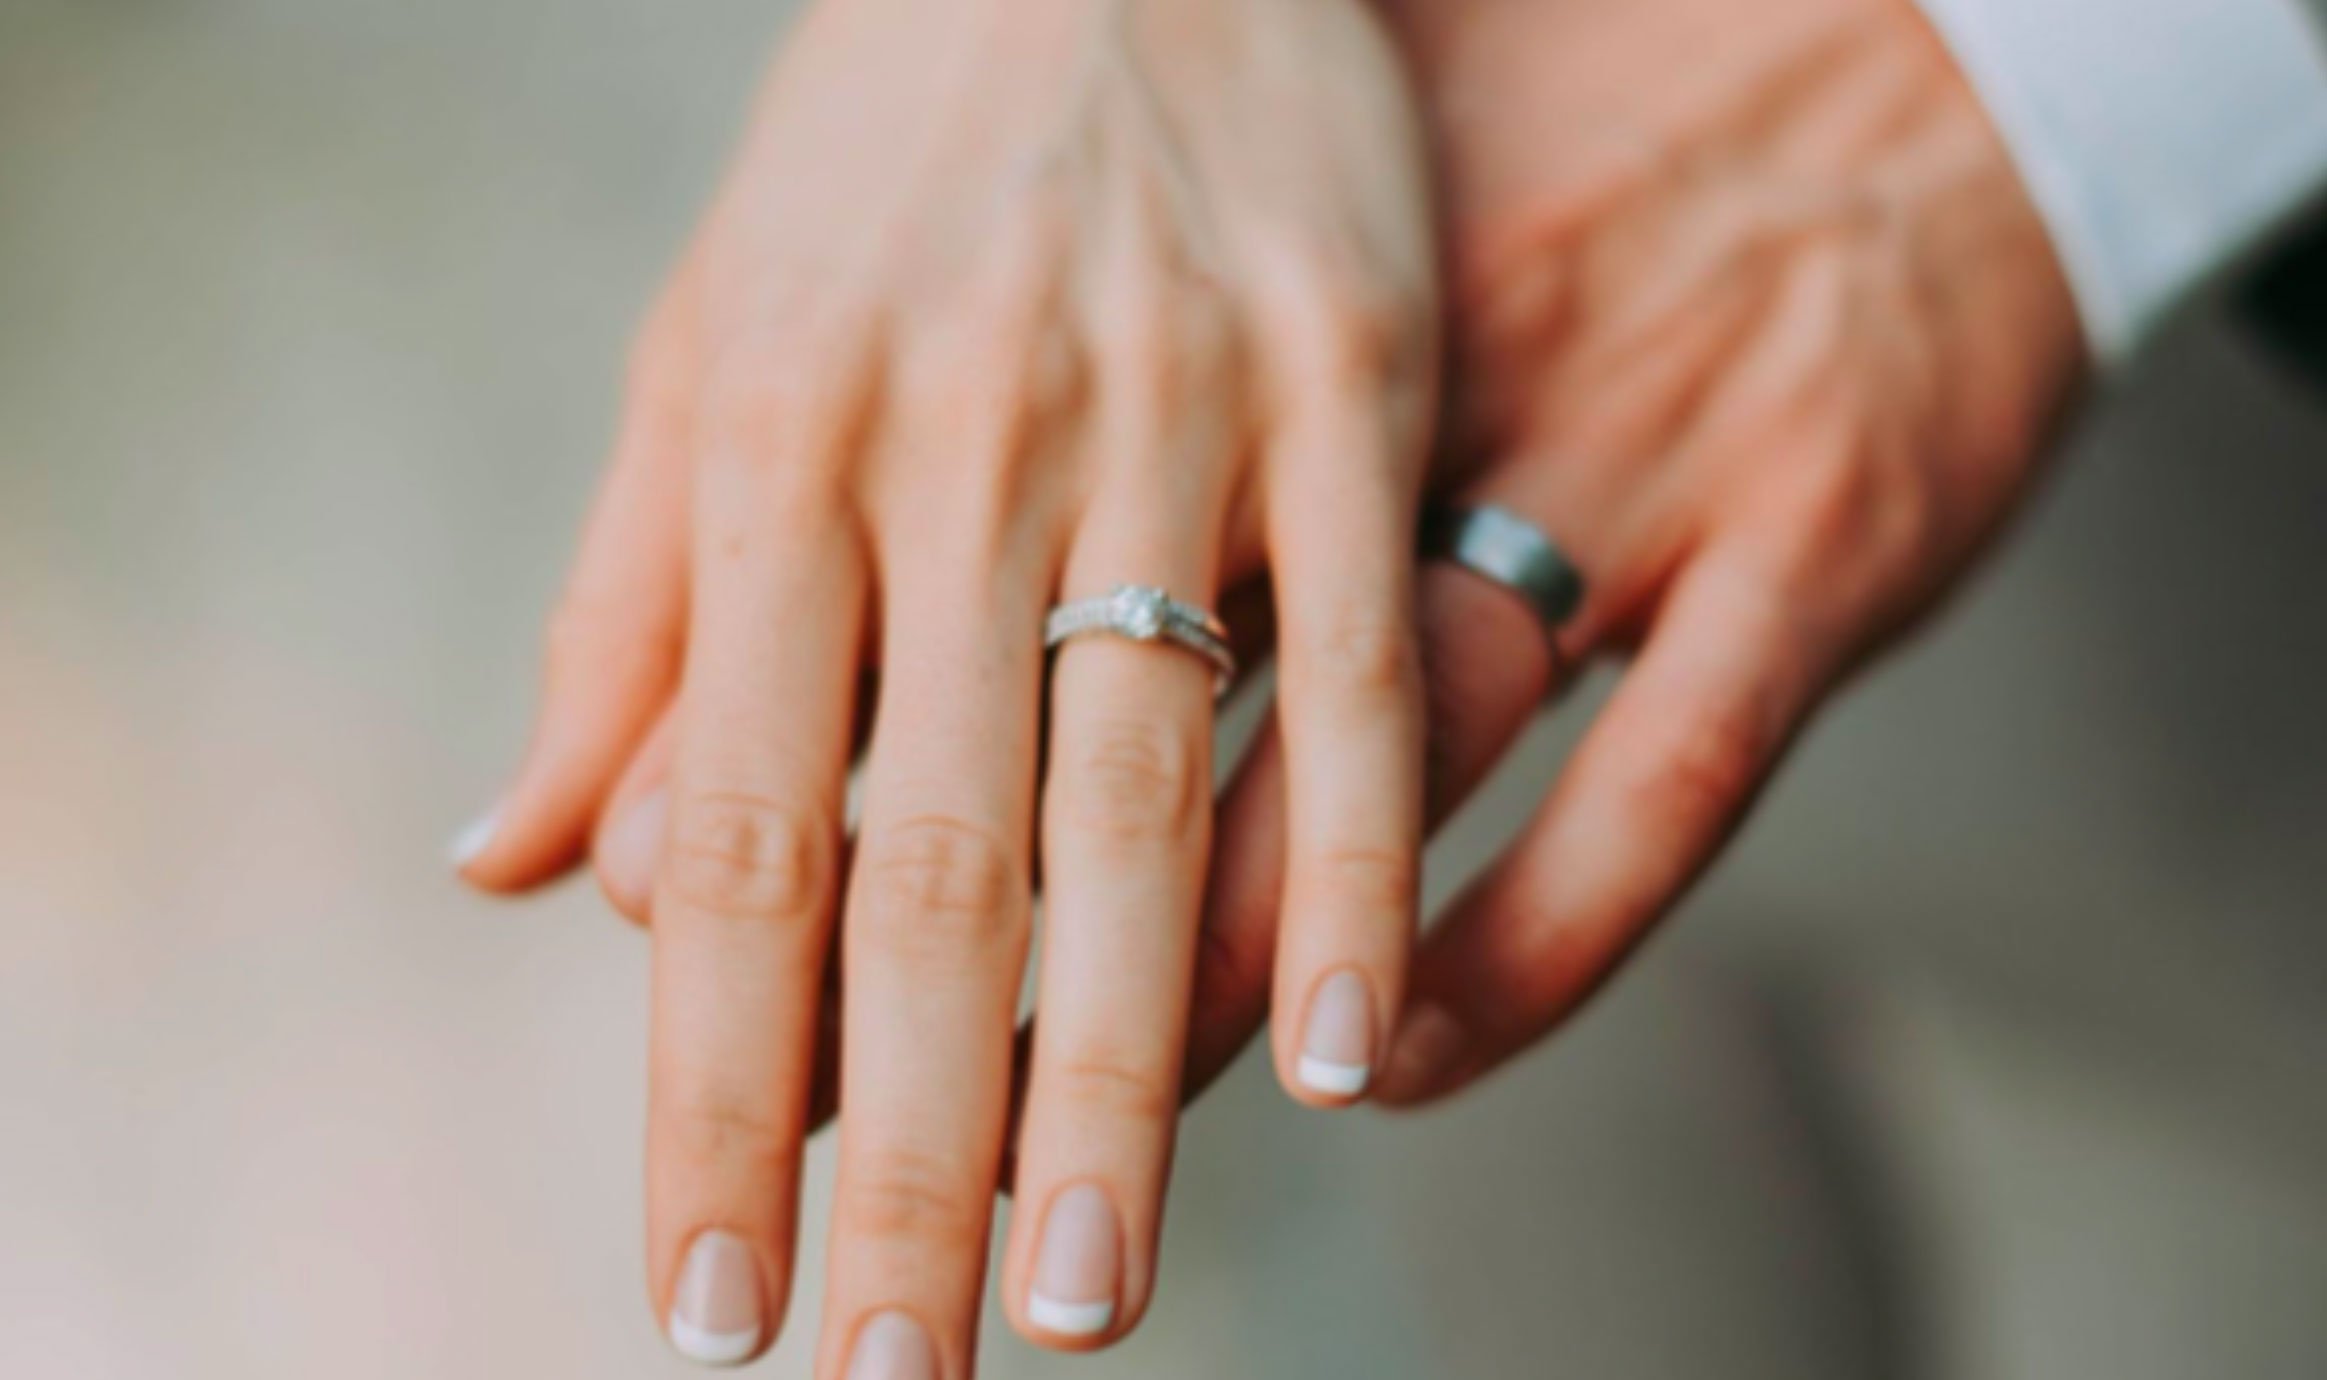 Do You Wear Your Engagement Ring On Your Wedding Day?